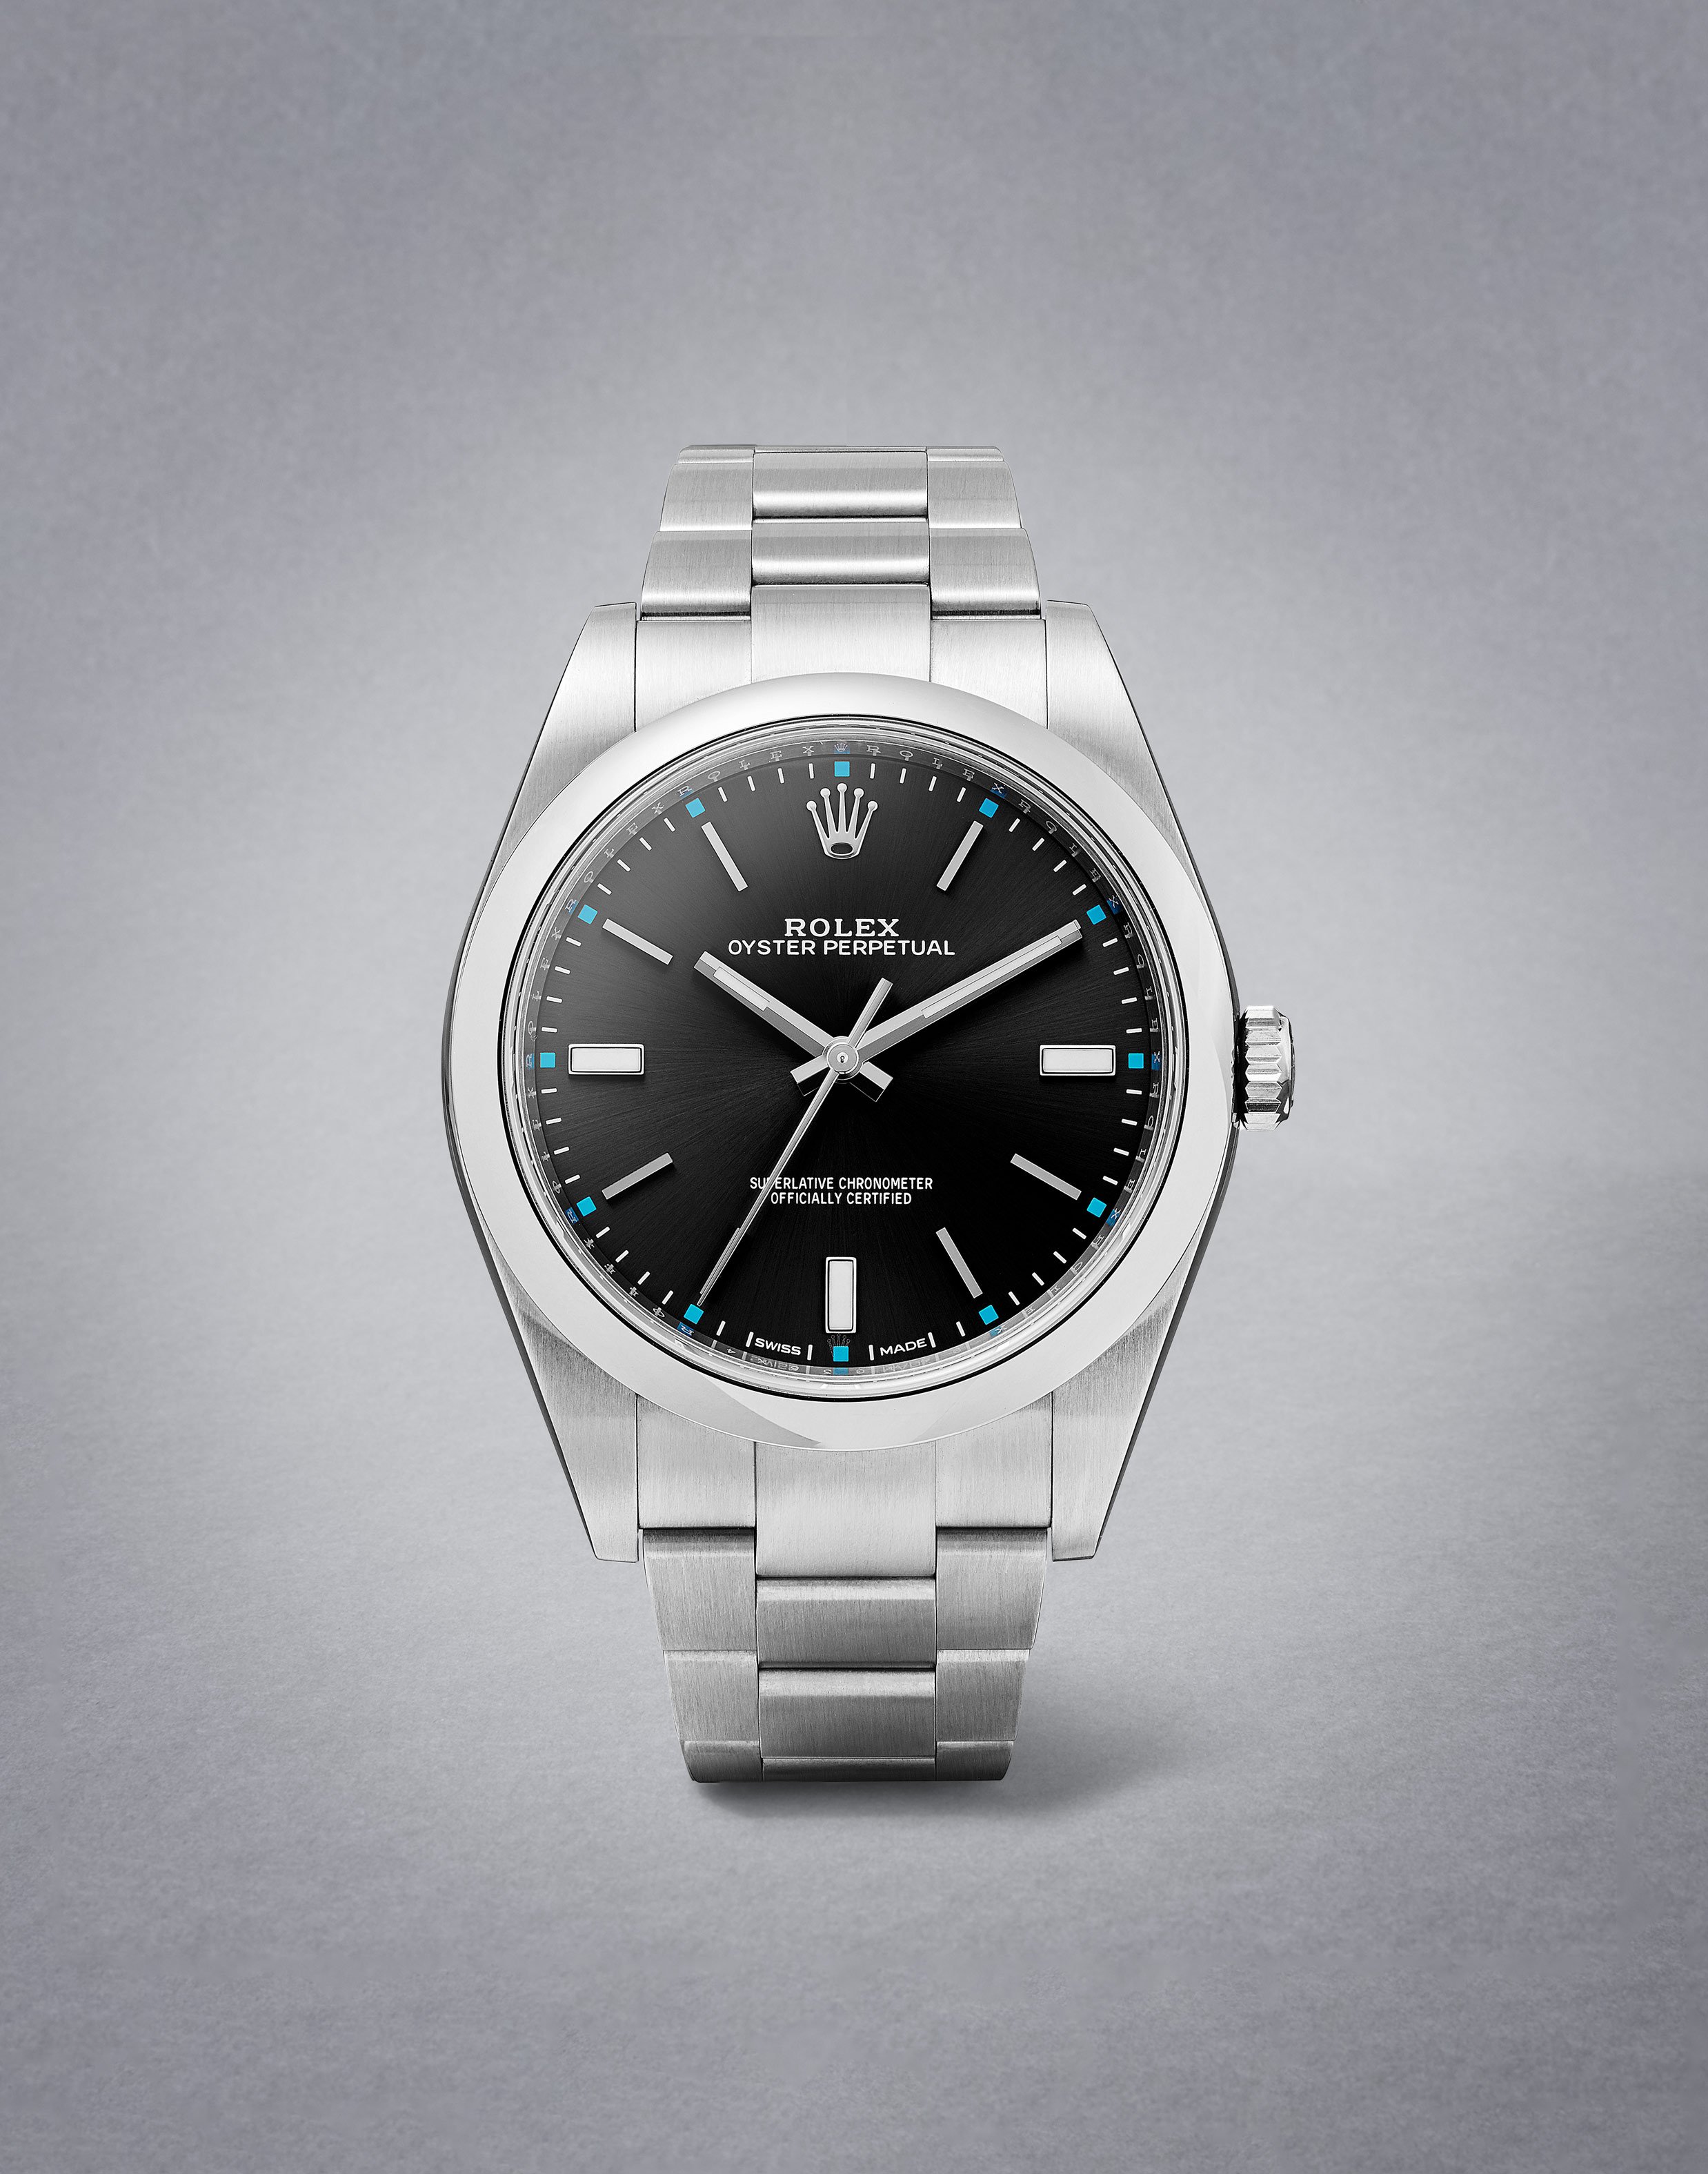 Royal Oyster Perpetual